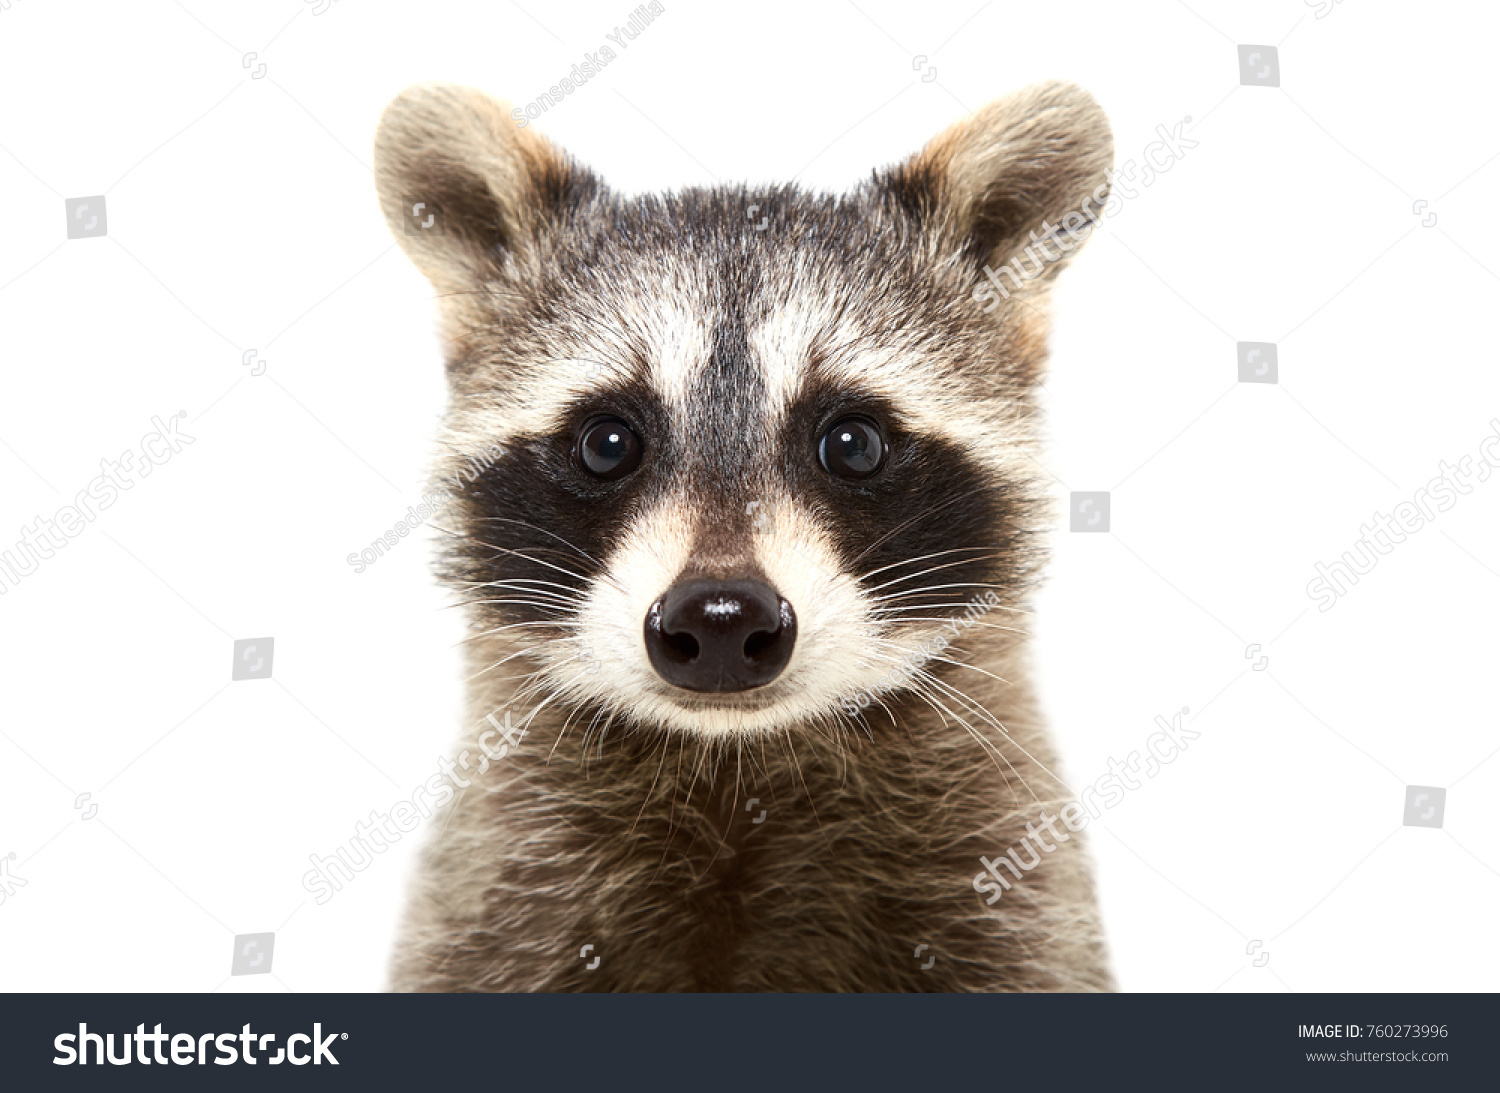 Portrait of a cute funny raccoon, closeup, isolated on white background #760273996